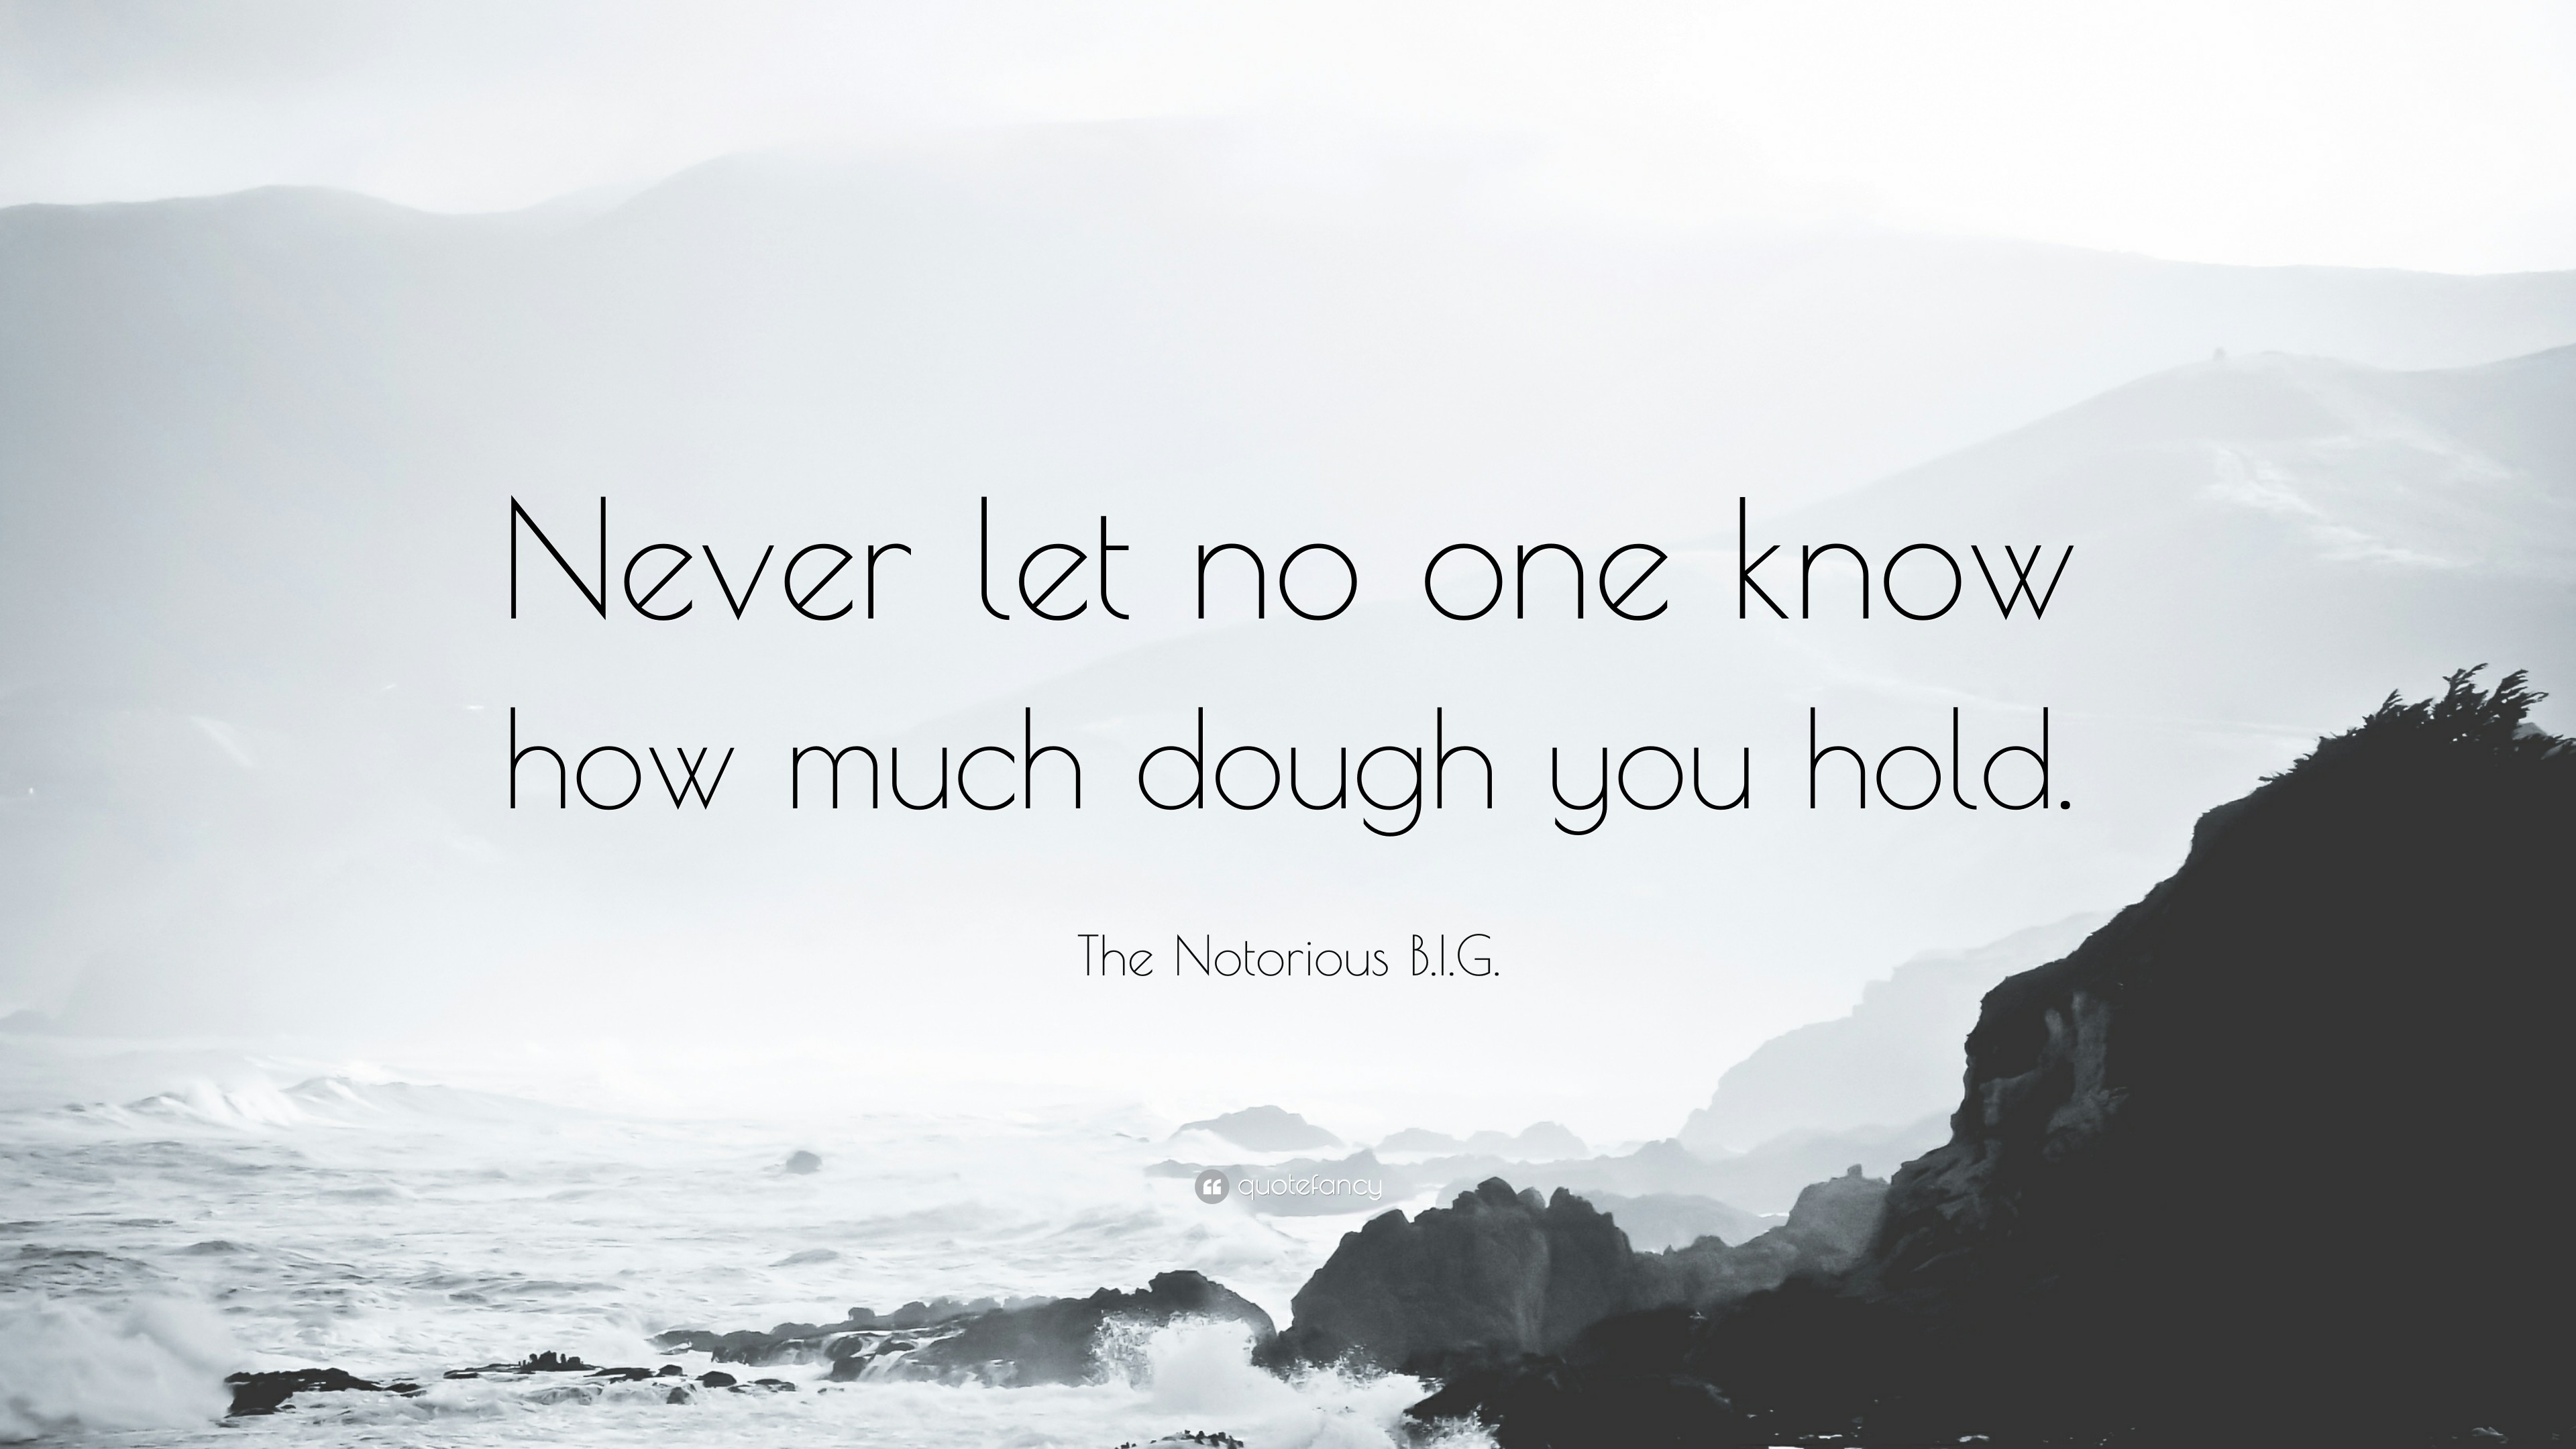 3840x2160 The Notorious B.I.G. Quote: “Never let no one know how much dough you hold